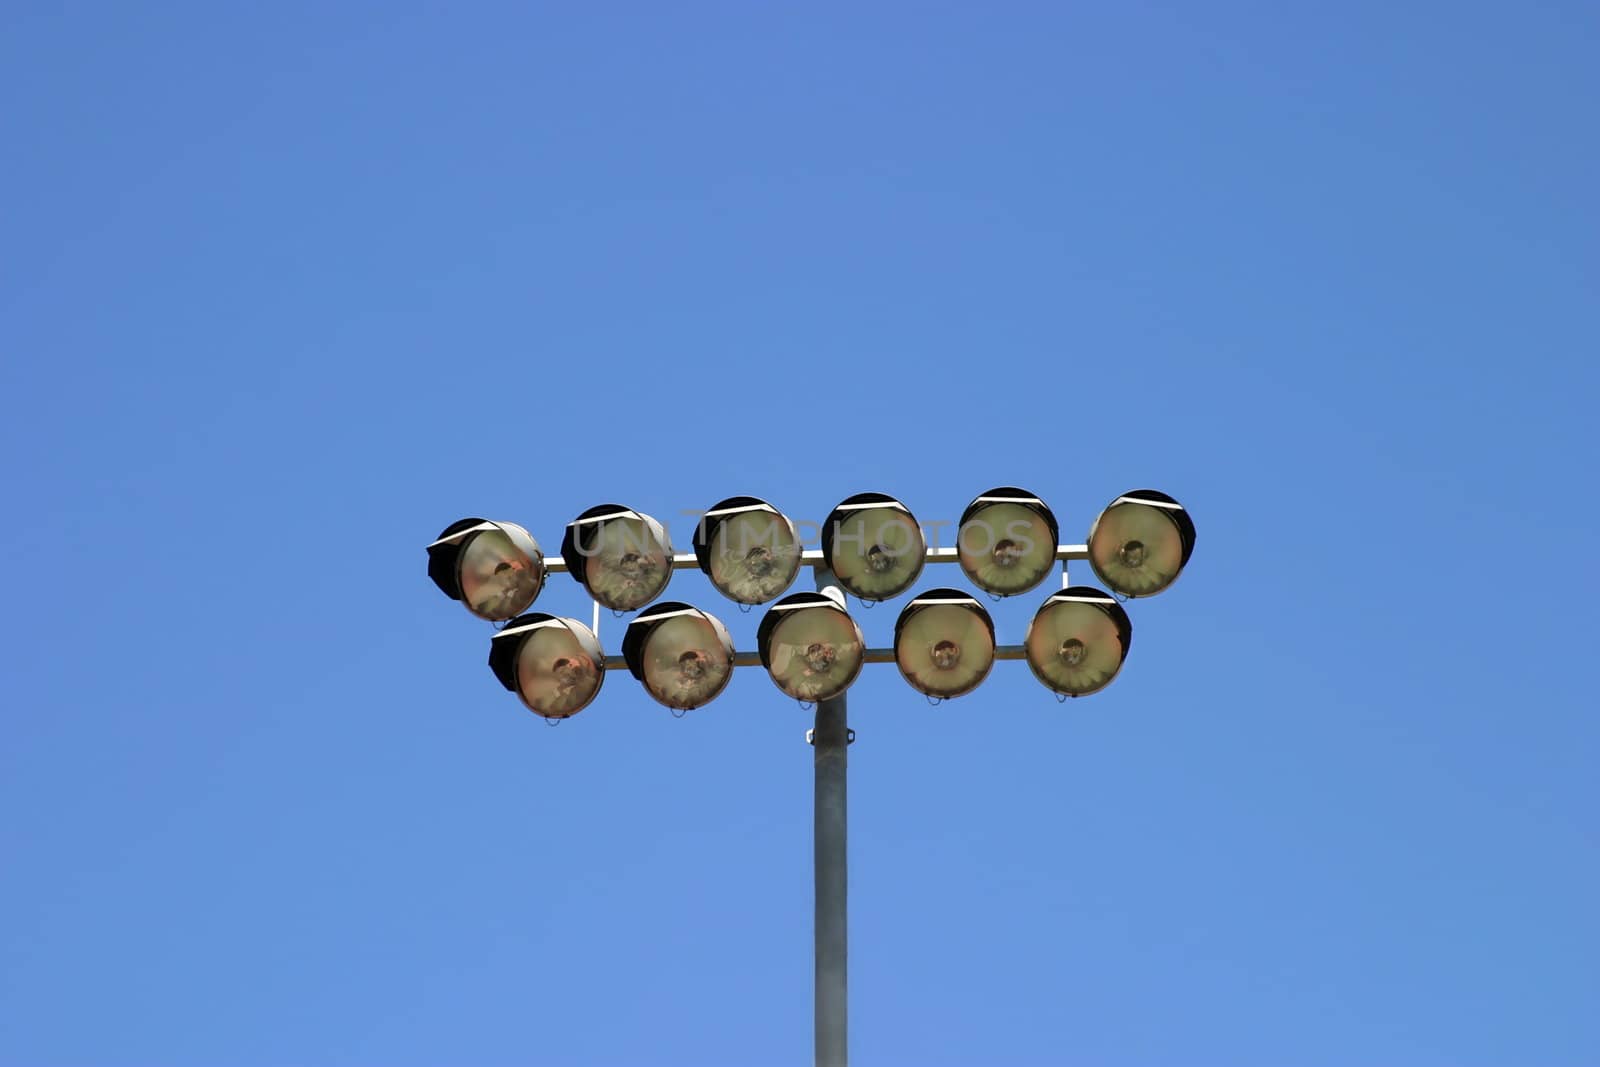 Floodlight from a football stadium with the sky as a background.